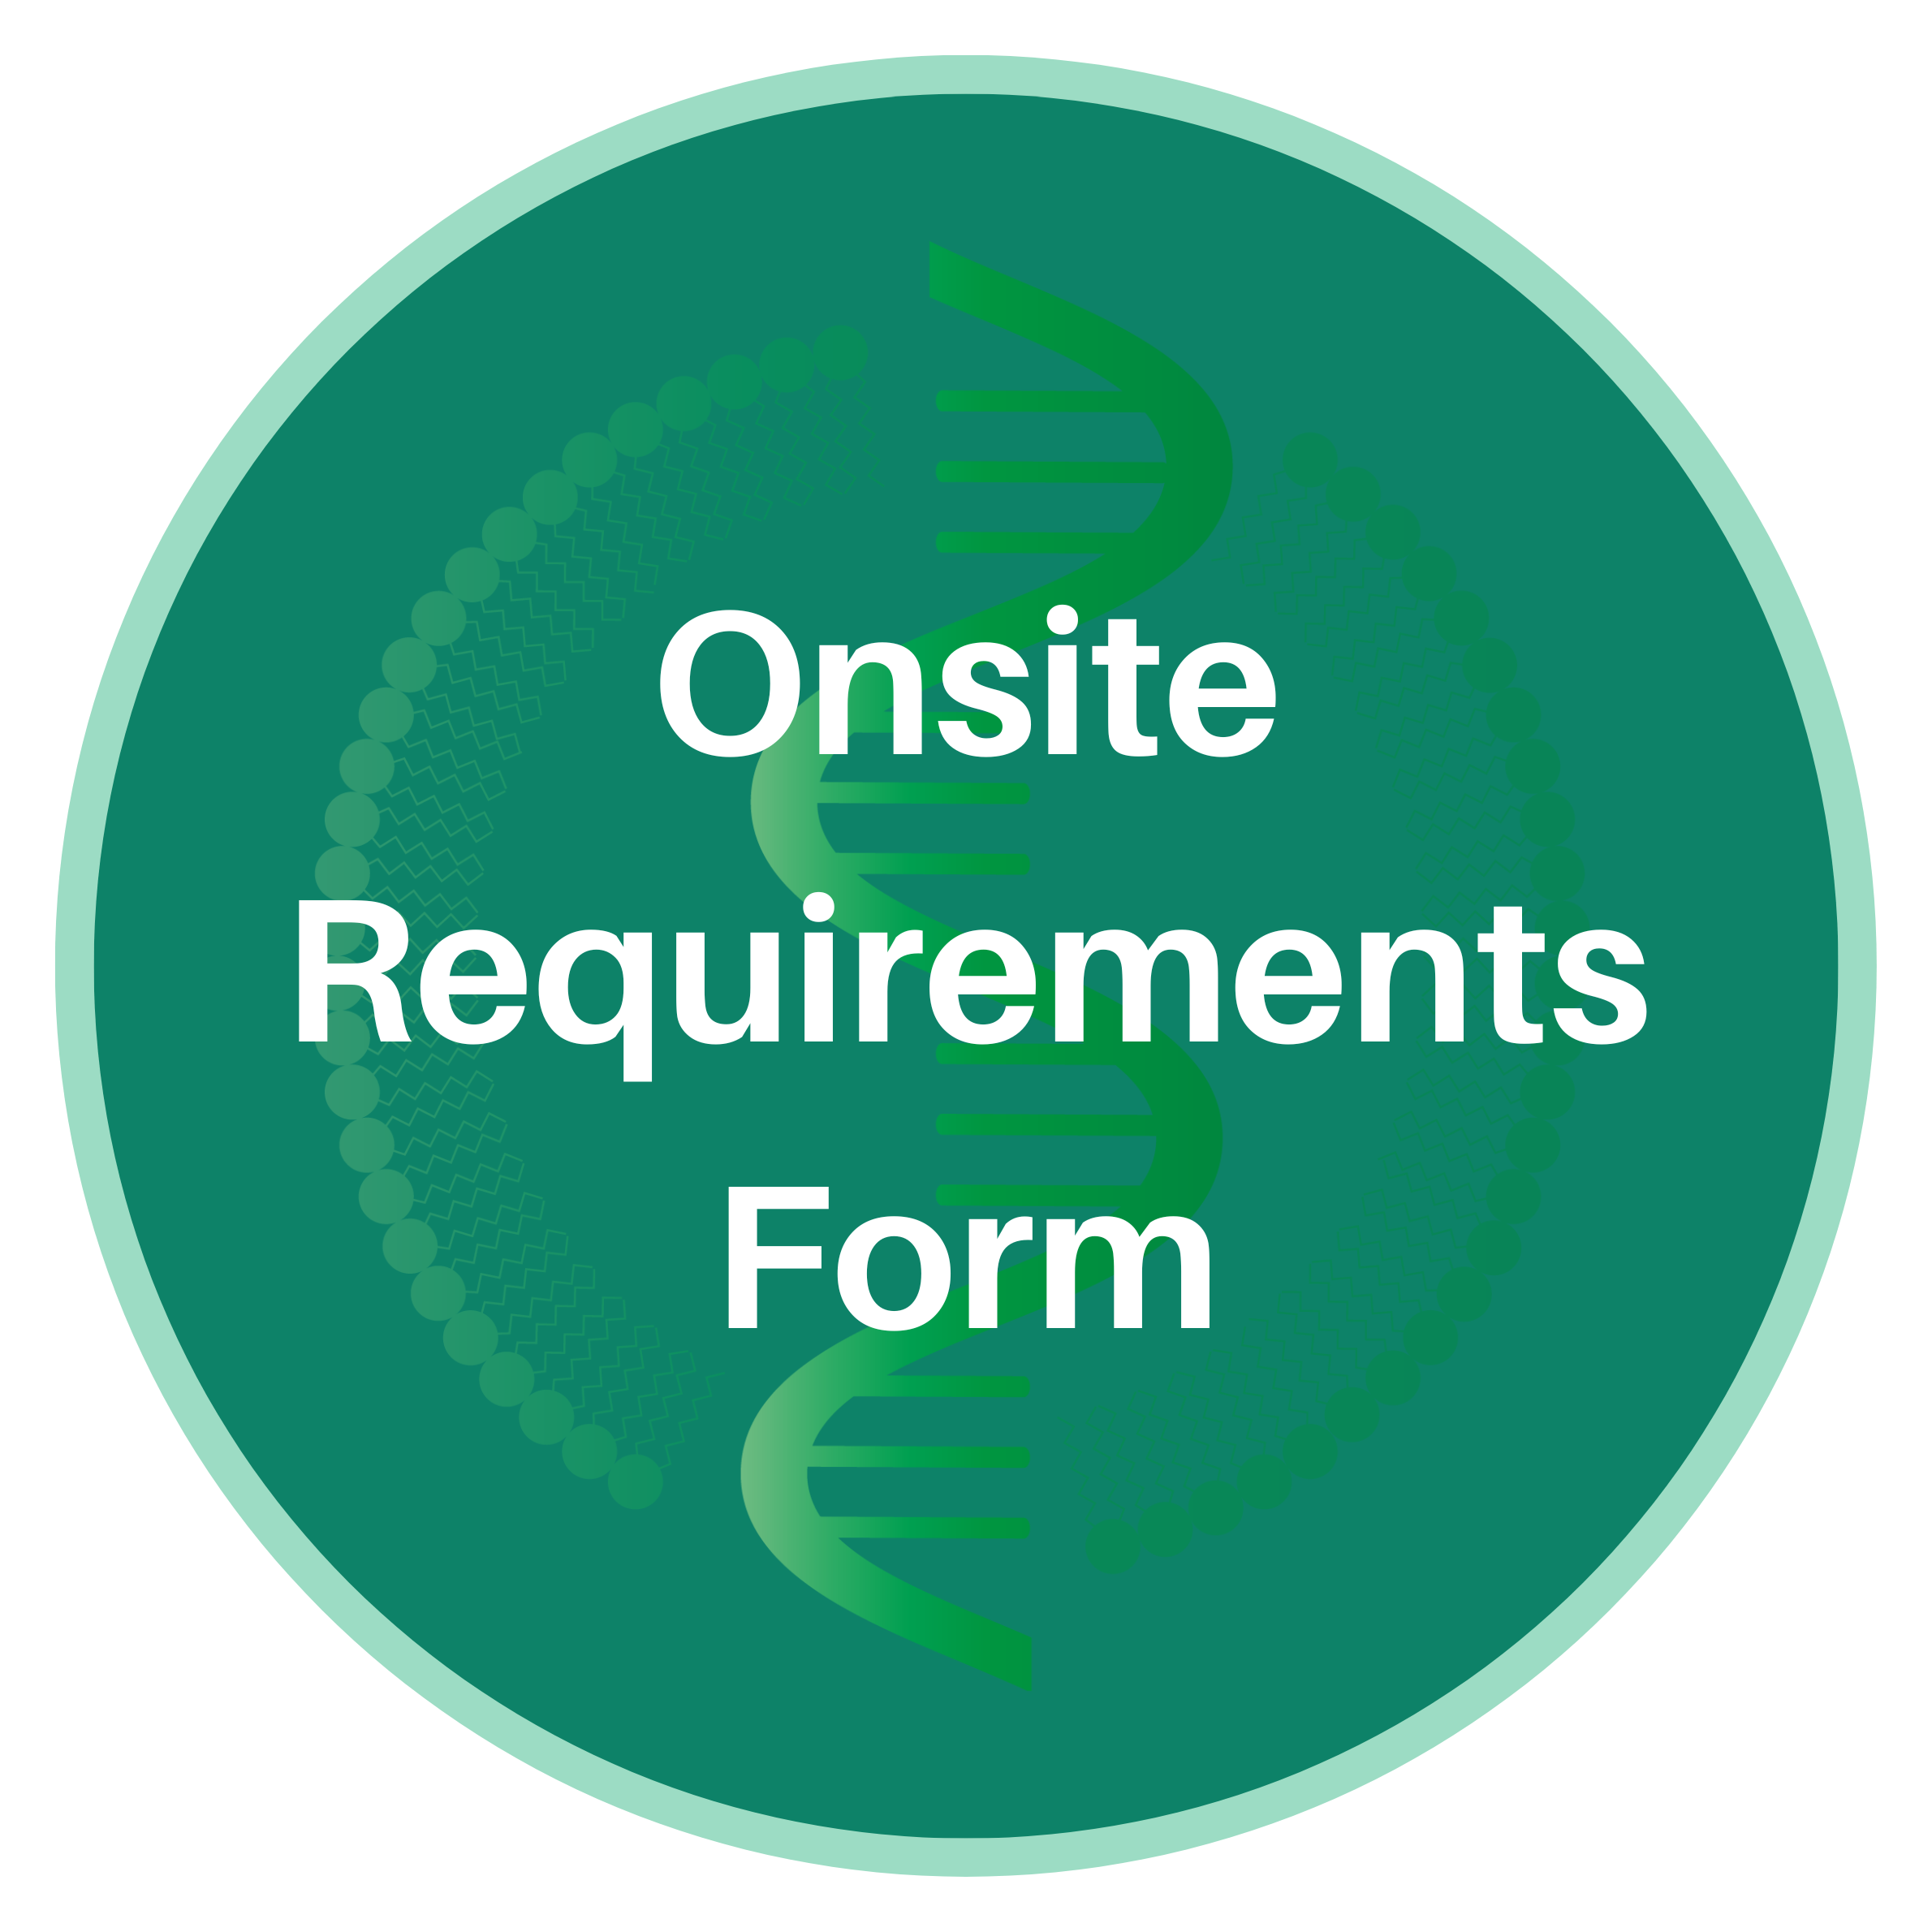 Onsite Requirements Form Button